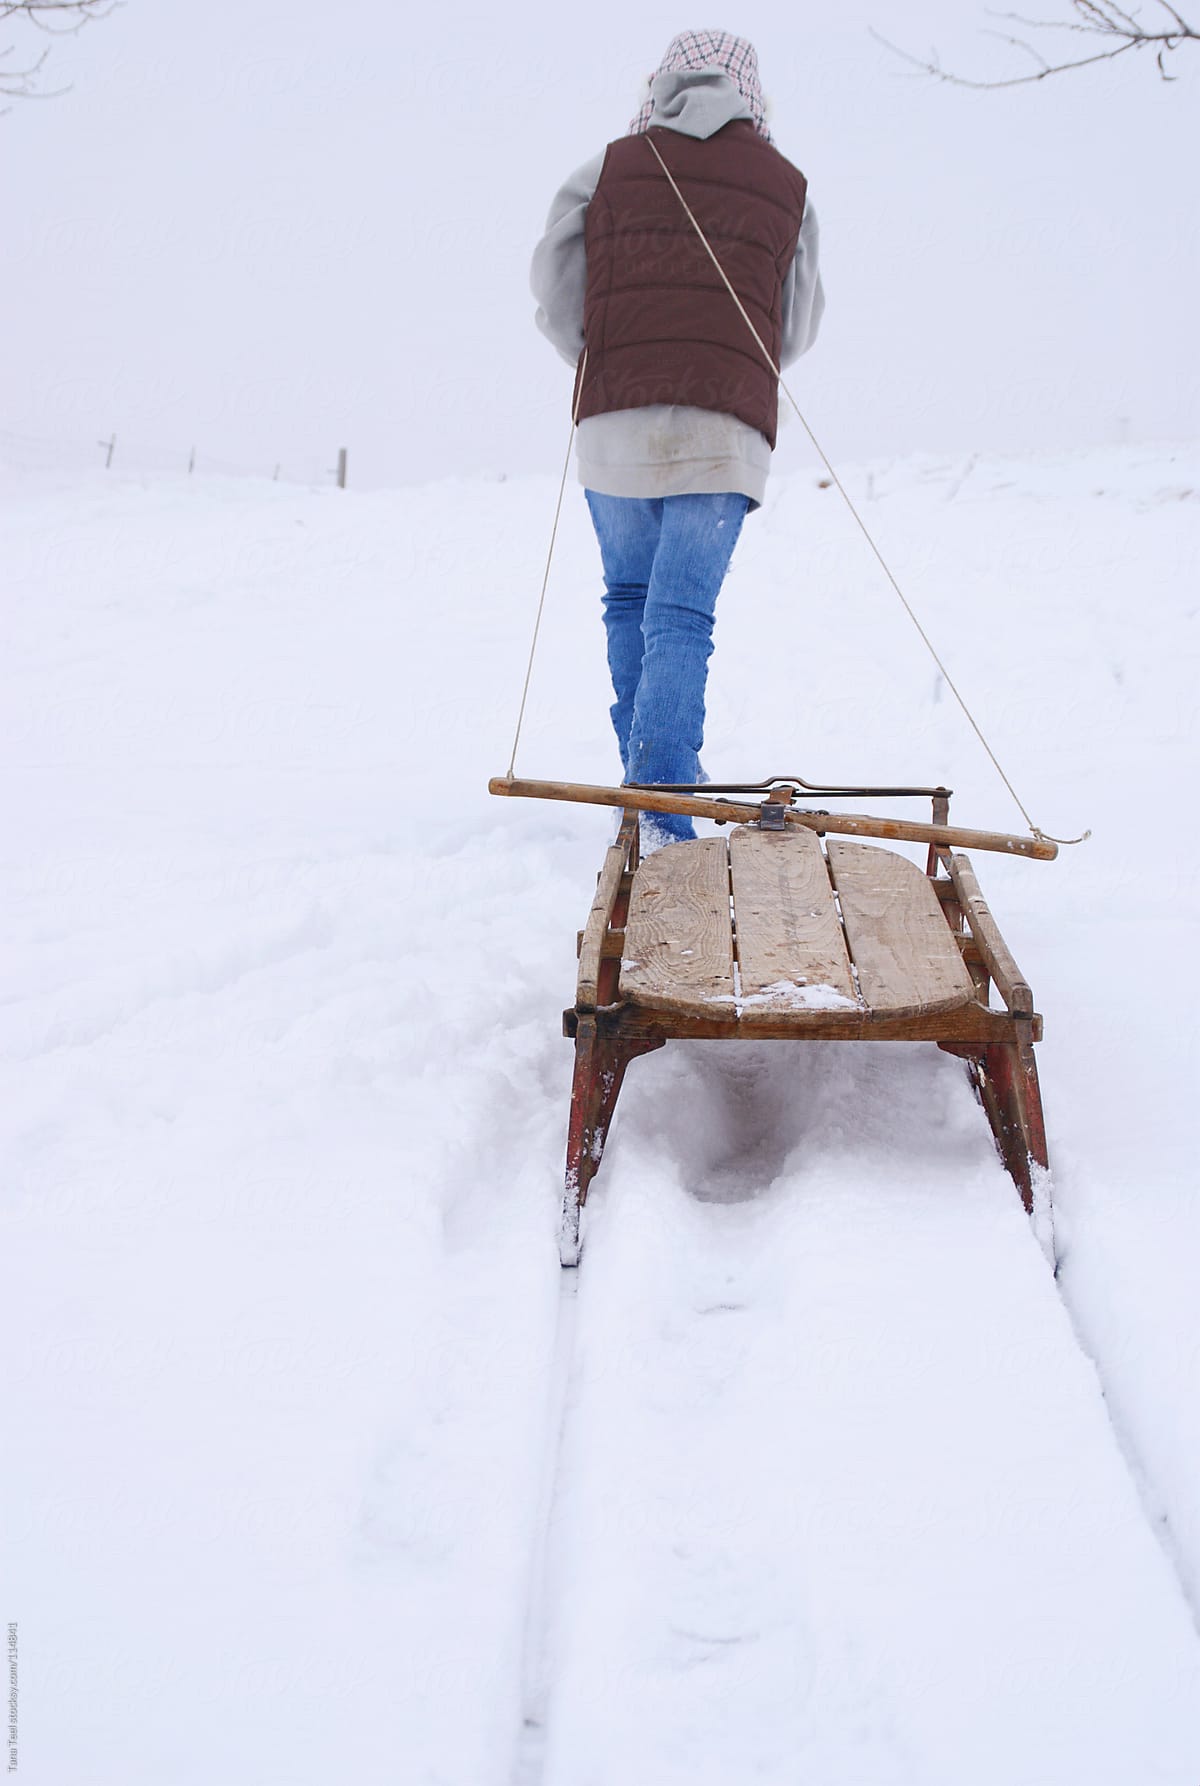 young girl pulling sled in snow